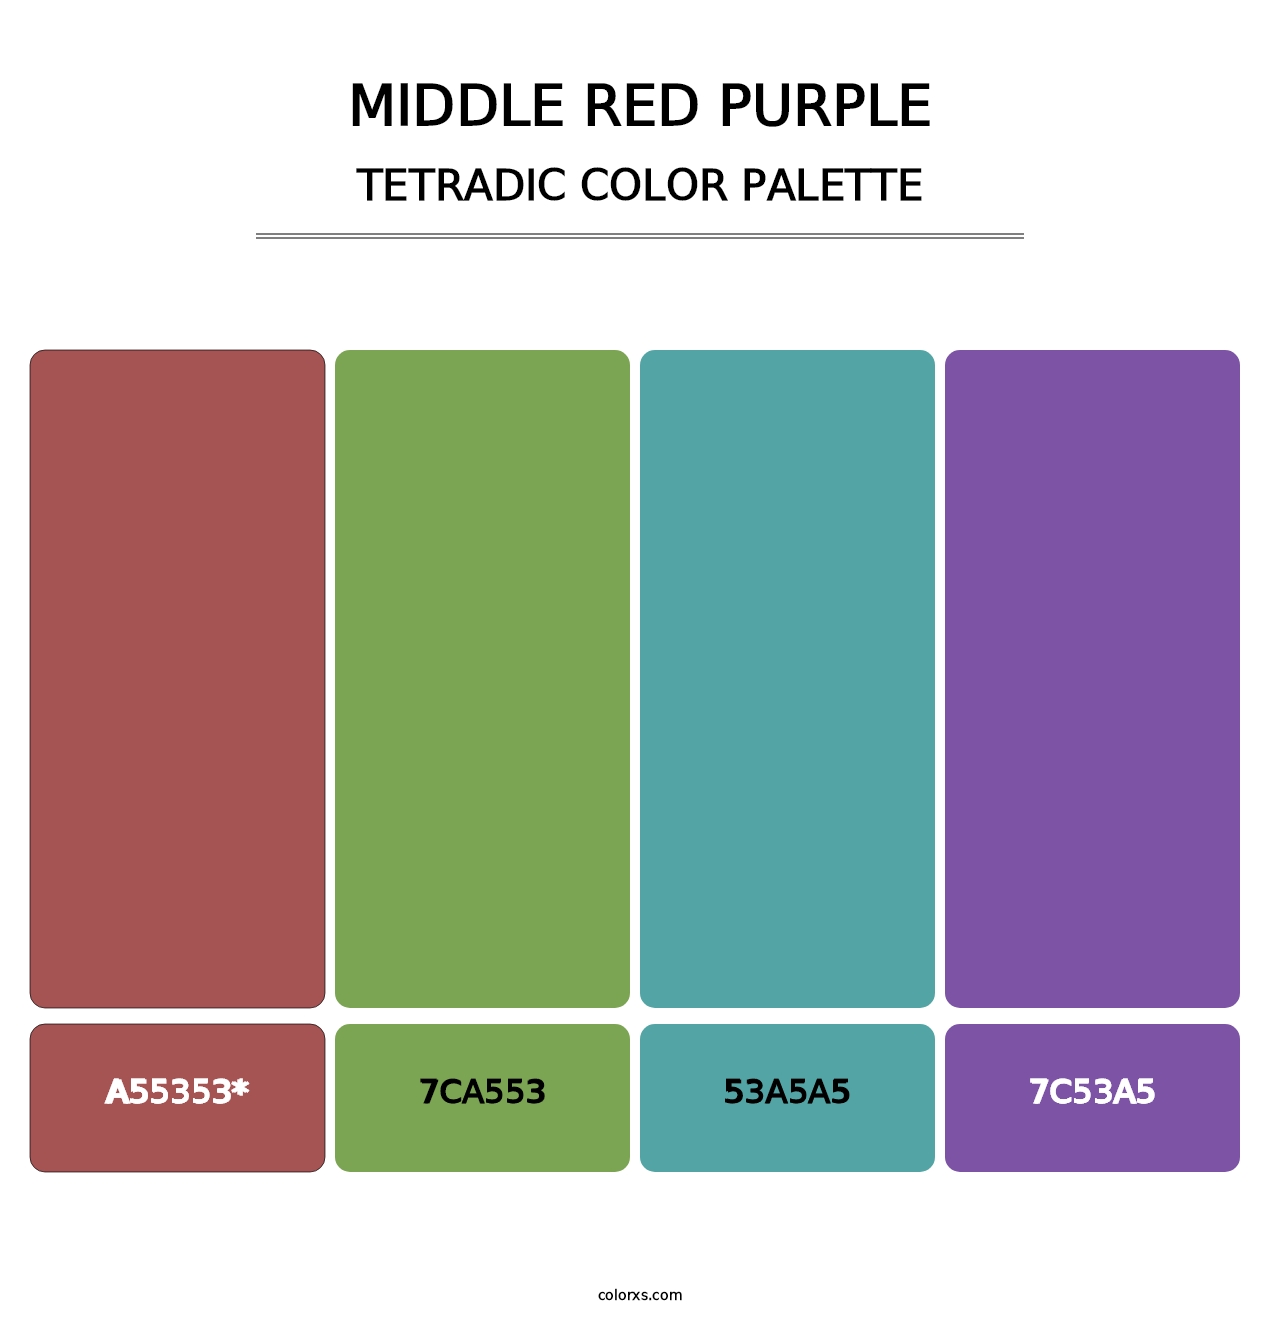 Middle Red Purple - Tetradic Color Palette